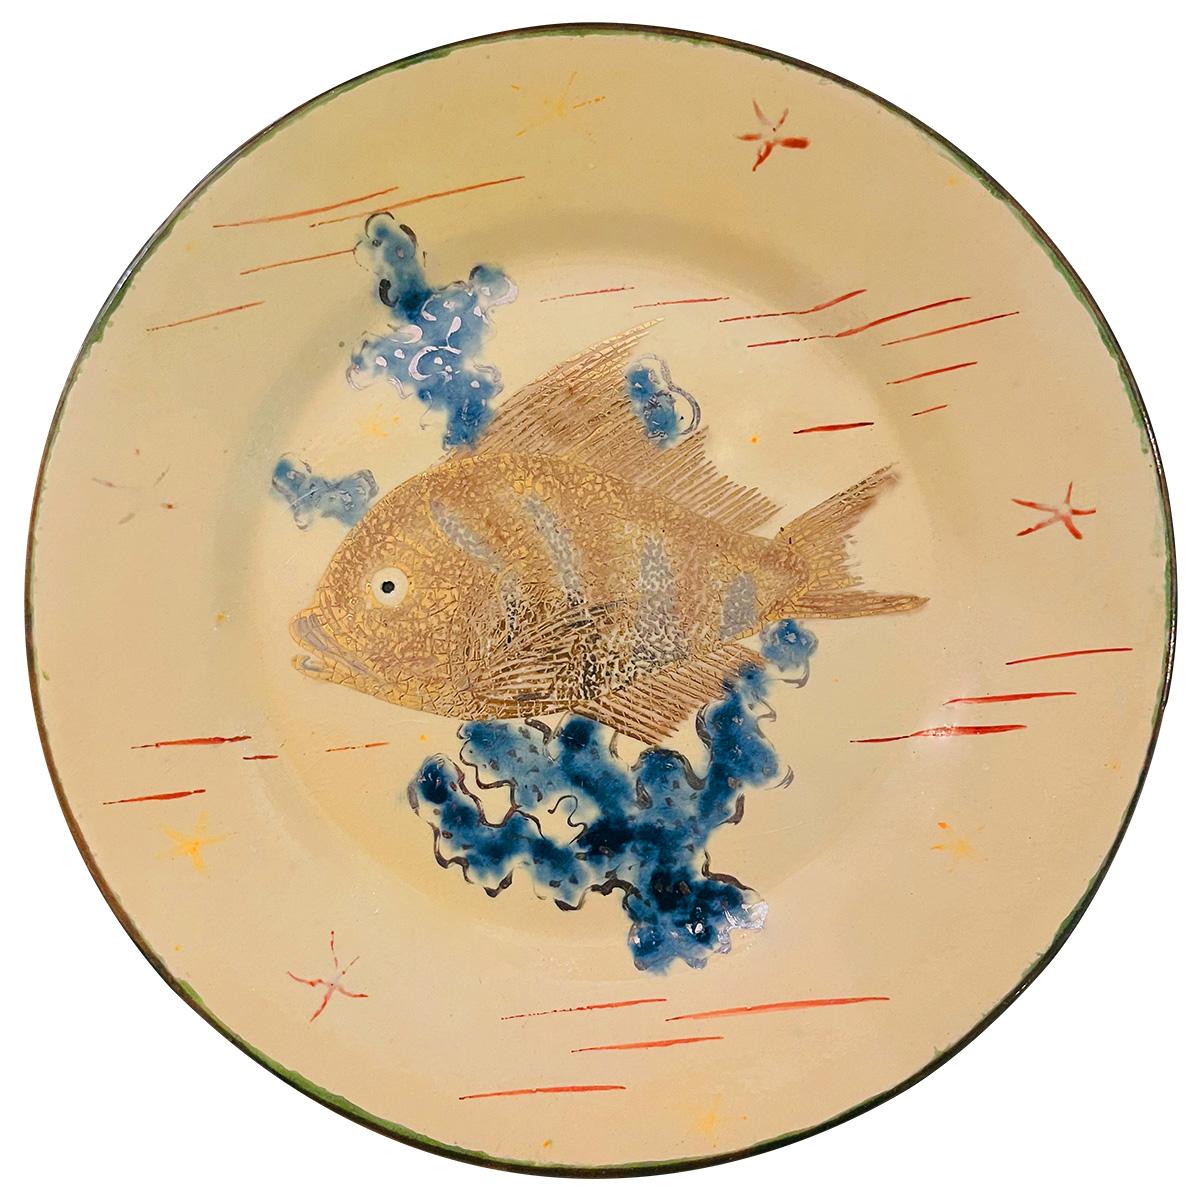 Set of 4 dinner plates, colored drawings with gold and silver highlights, enameled decoration of fish and seabed, green back. 
Set composed as follows:
- 1 plate with a gold-coloured fish, blue seaweed
- 1 plate with a blue fish, green, purple and